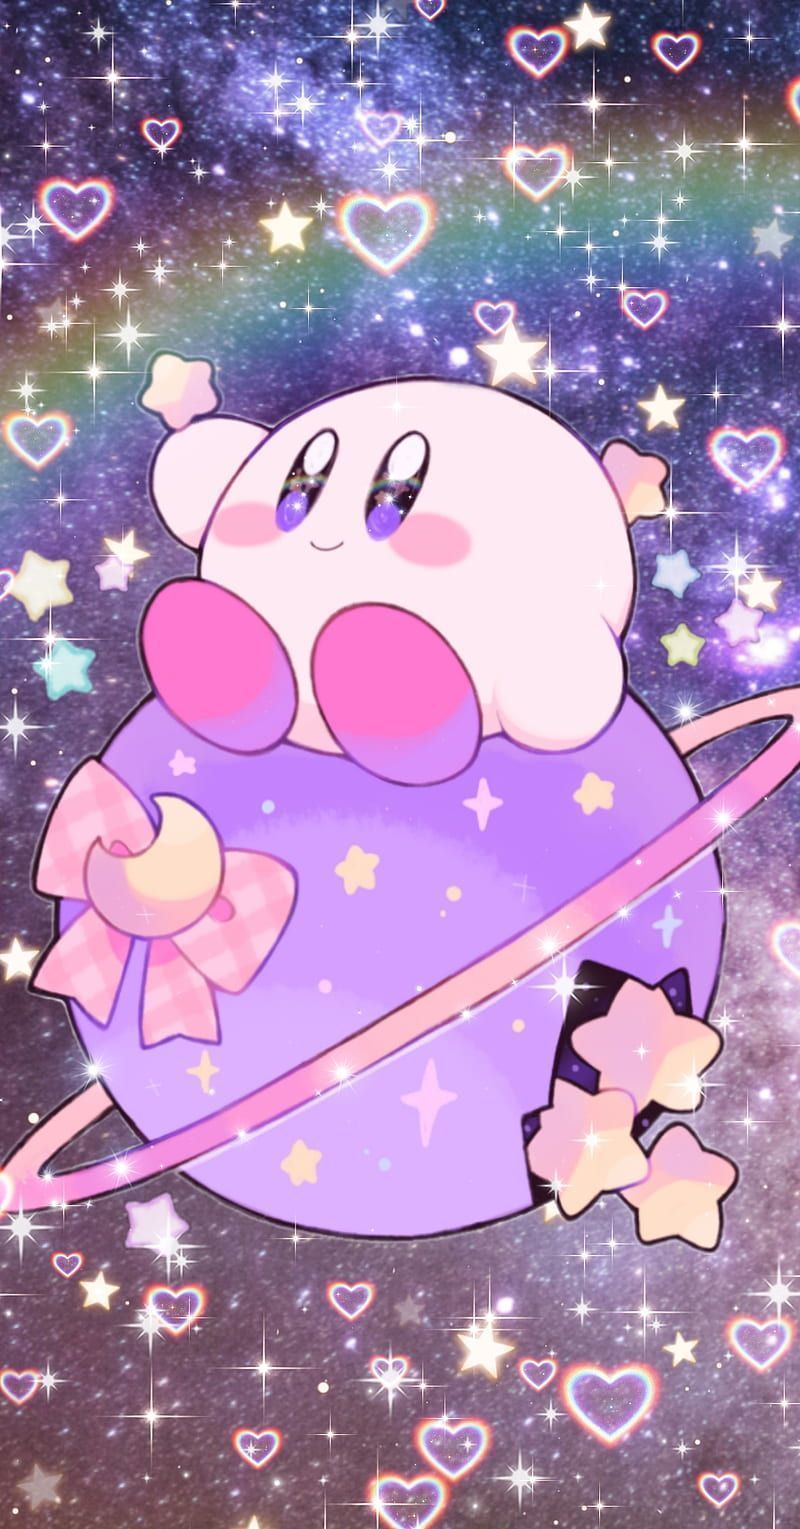 Kirby iPhone Wallpaper with high-resolution 1080x1920 pixel. You can use this wallpaper for your iPhone 5, 6, 7, 8, X, XS, XR backgrounds, Mobile Screensaver, or iPad Lock Screen - Kirby